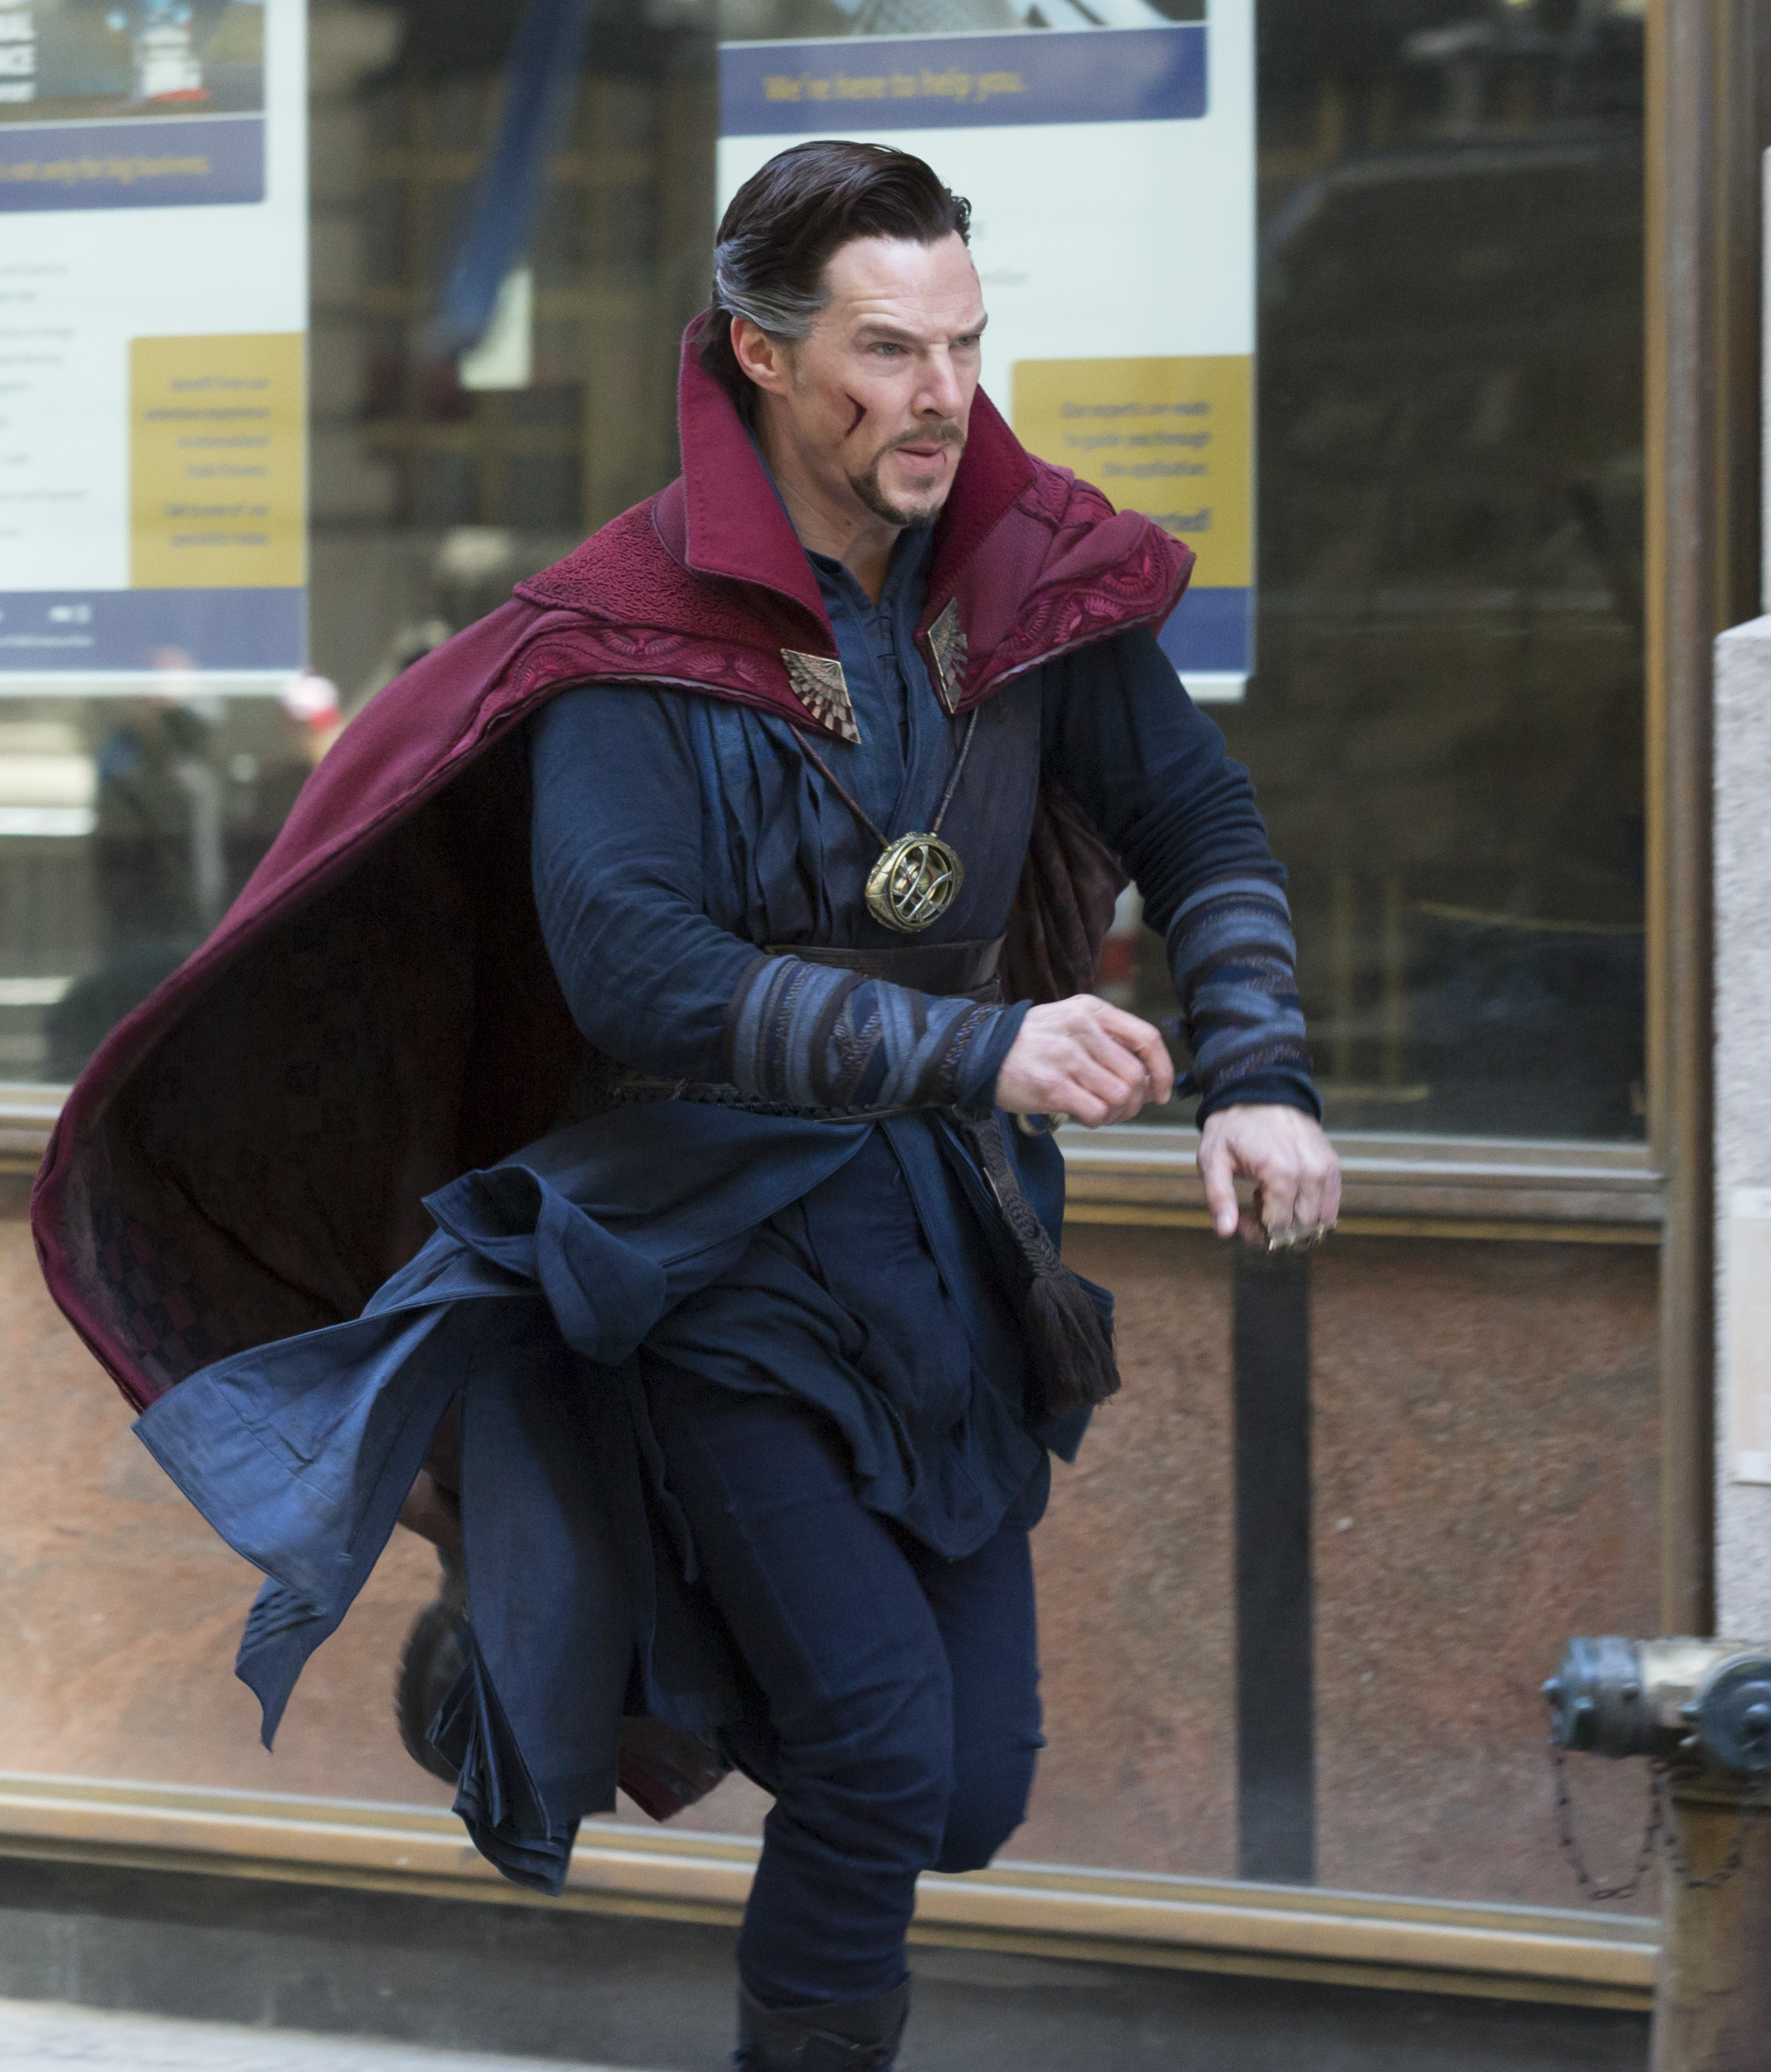 On location with 'Doctor Strange' filming in New York City Featuring: Benedict Cumberbatch Where: New York, New York, United States When: 04 Apr 2016 Credit: WENN.com